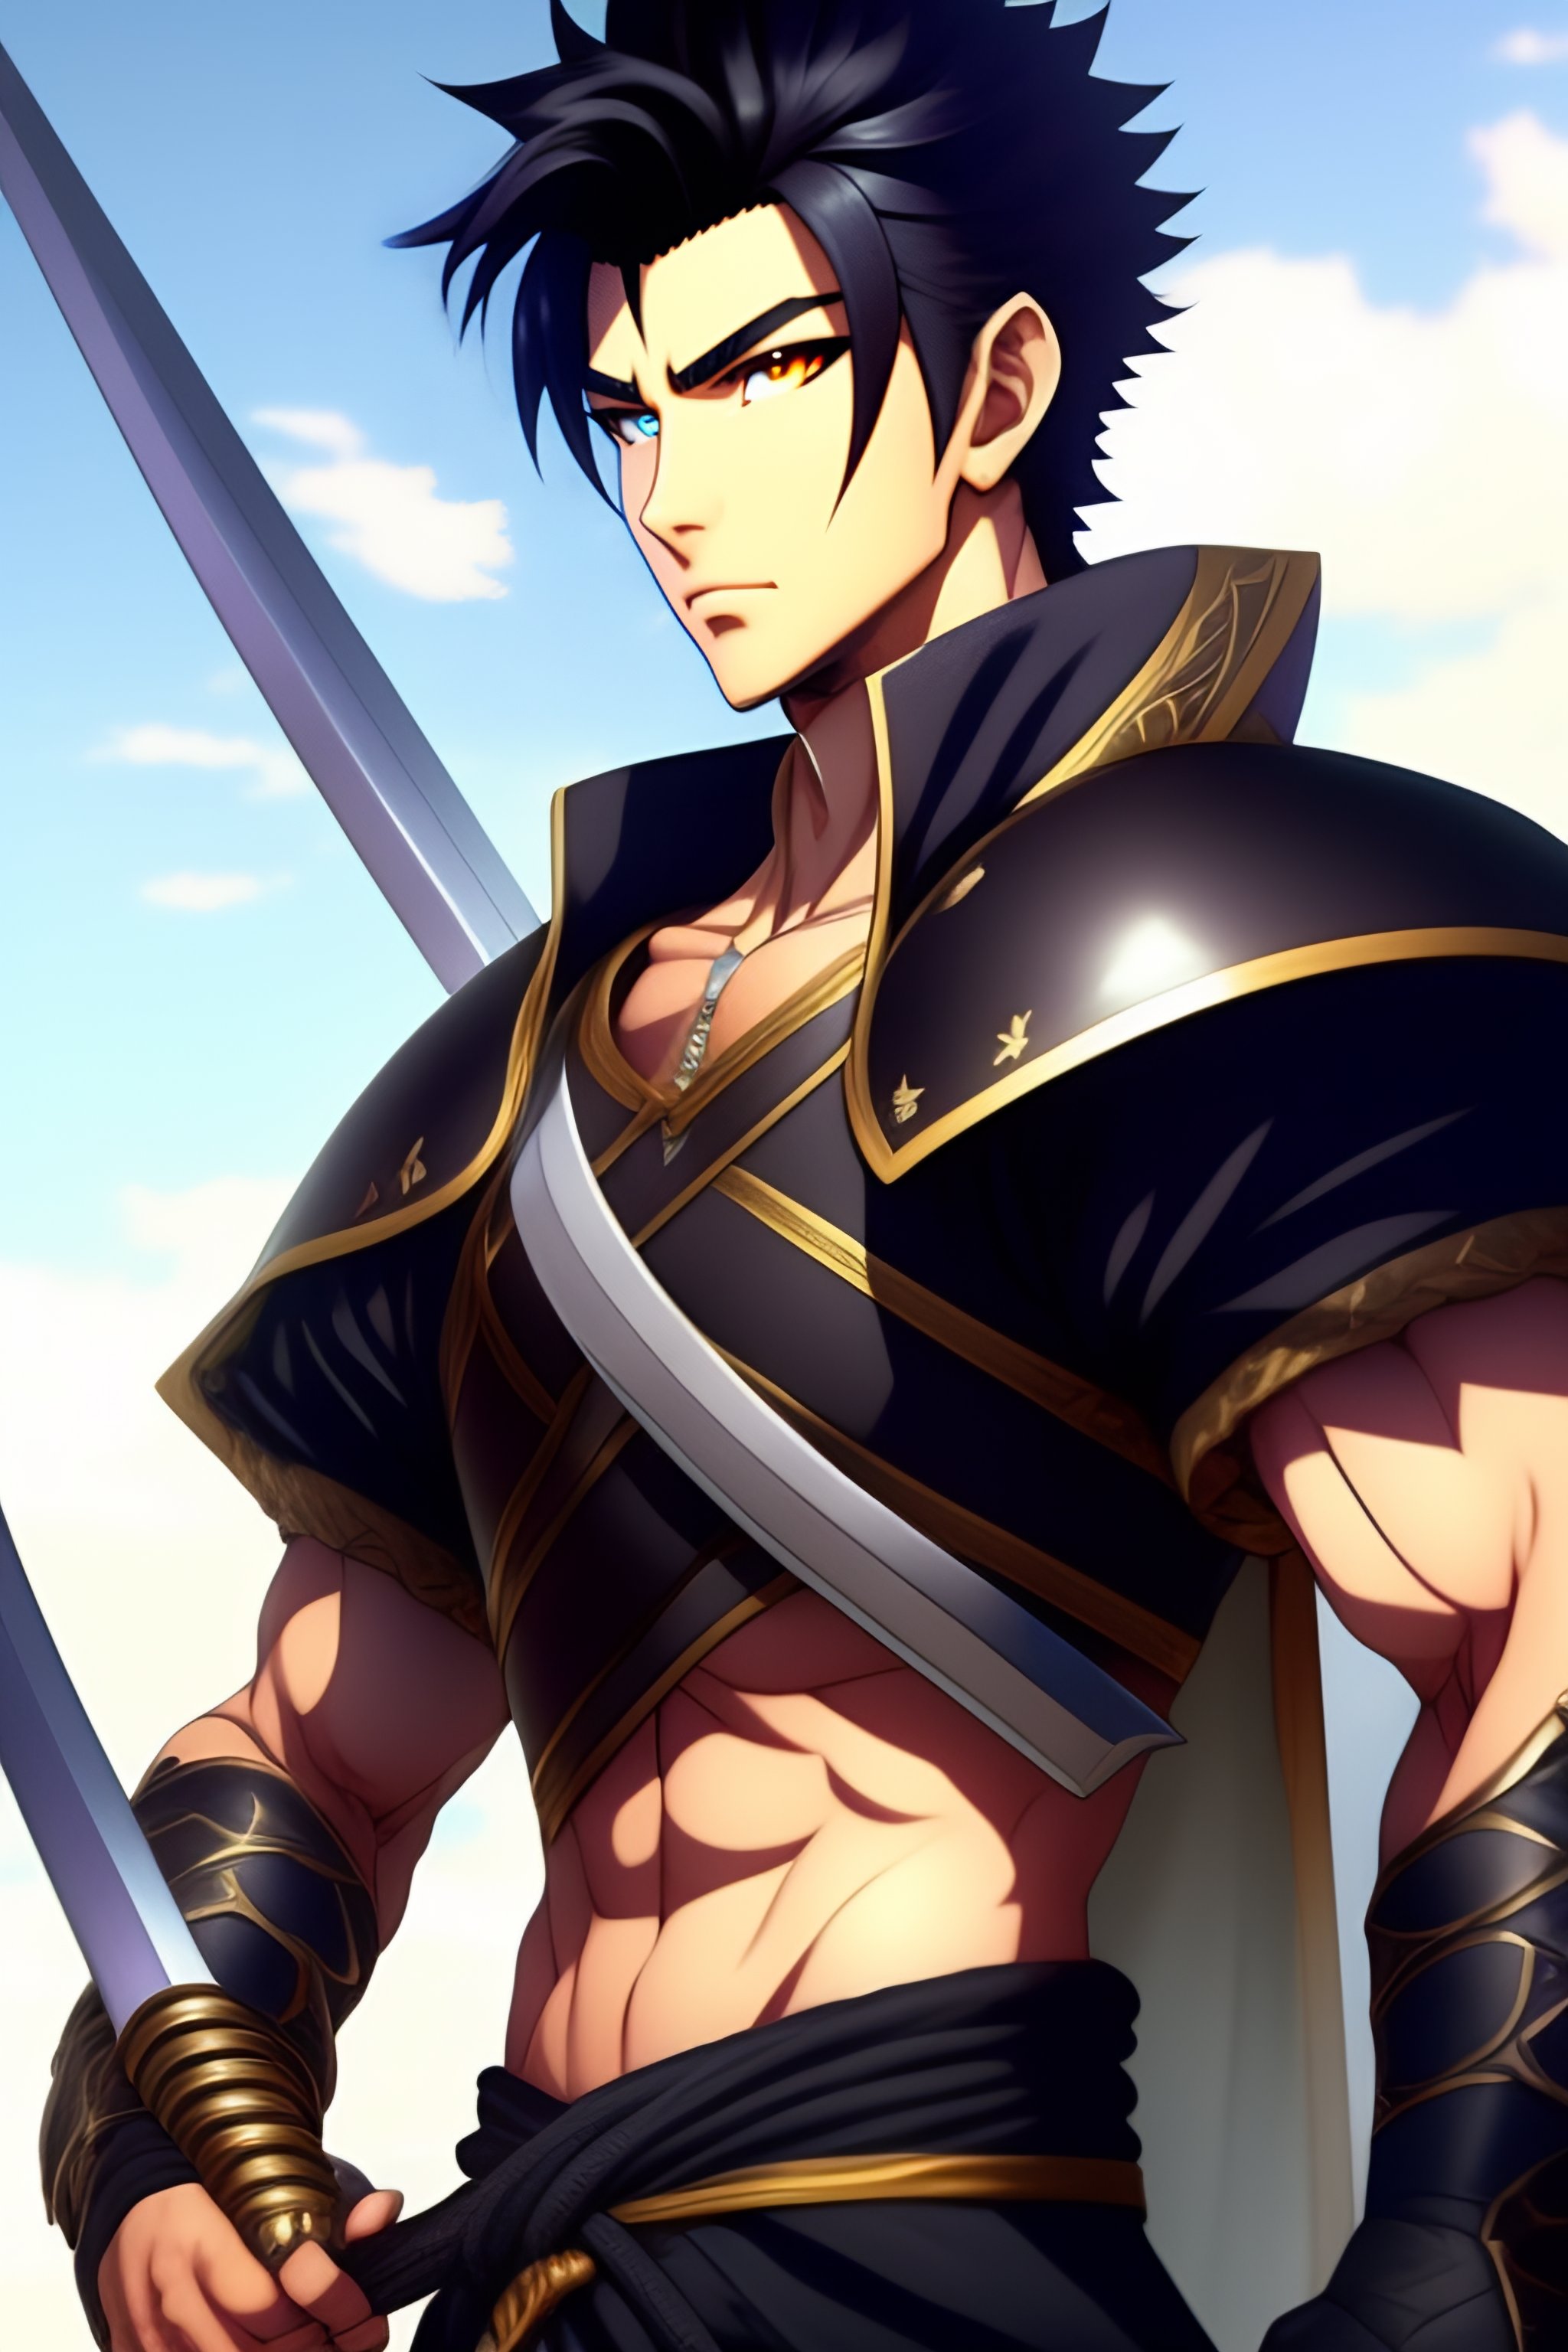 Lexica - Anime character who is a tall, muscular young man with short,  spiky black hair and dark eyes. He has a bold and confident demeanor, and  he i...